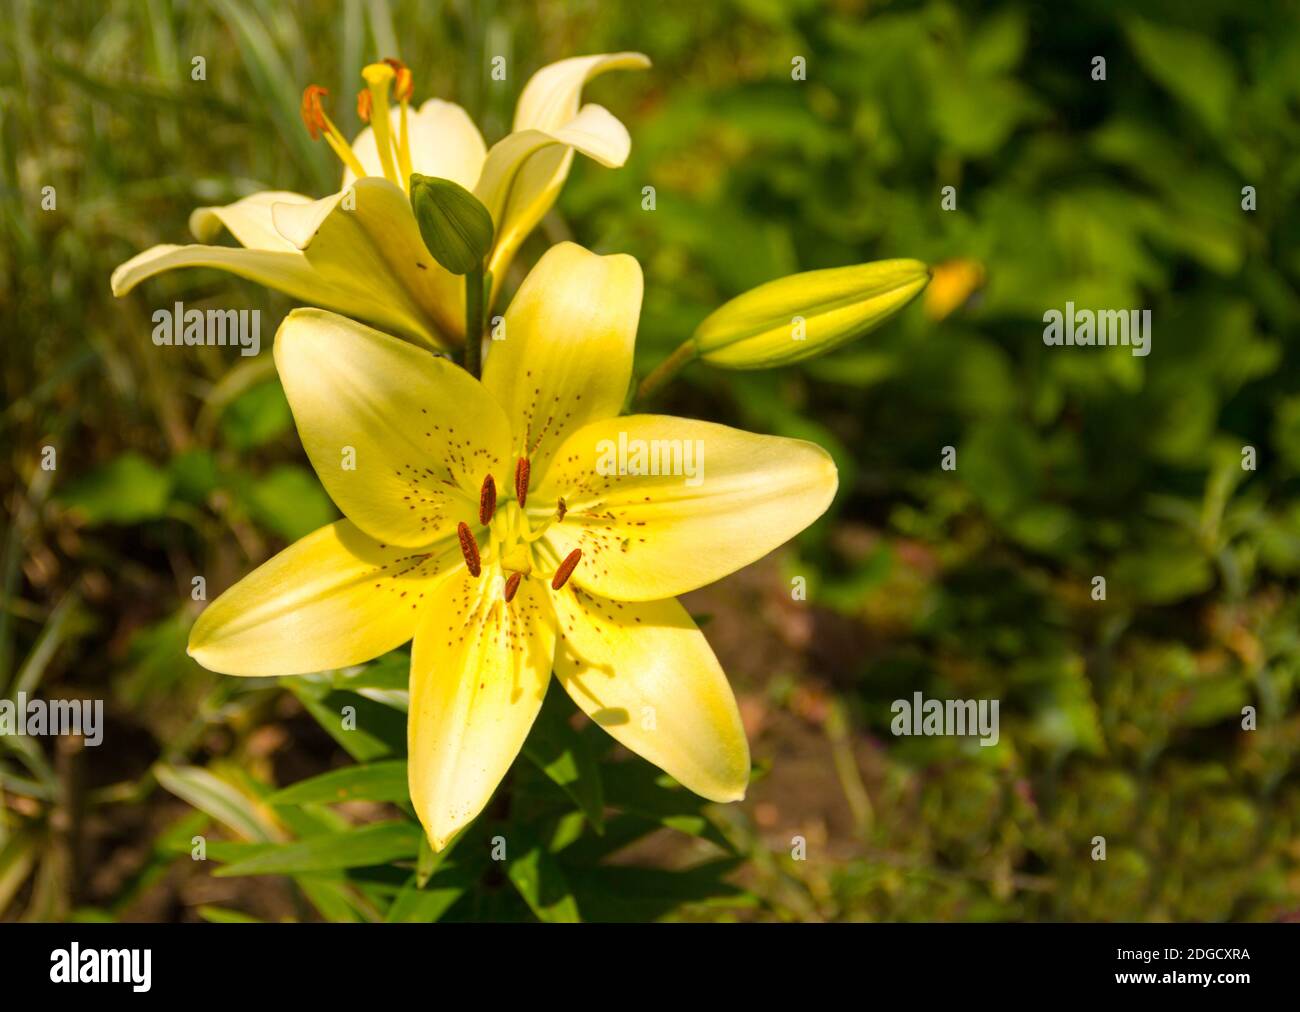 Open flower of yellow color in sunlight tiger lily close-up Stock Photo